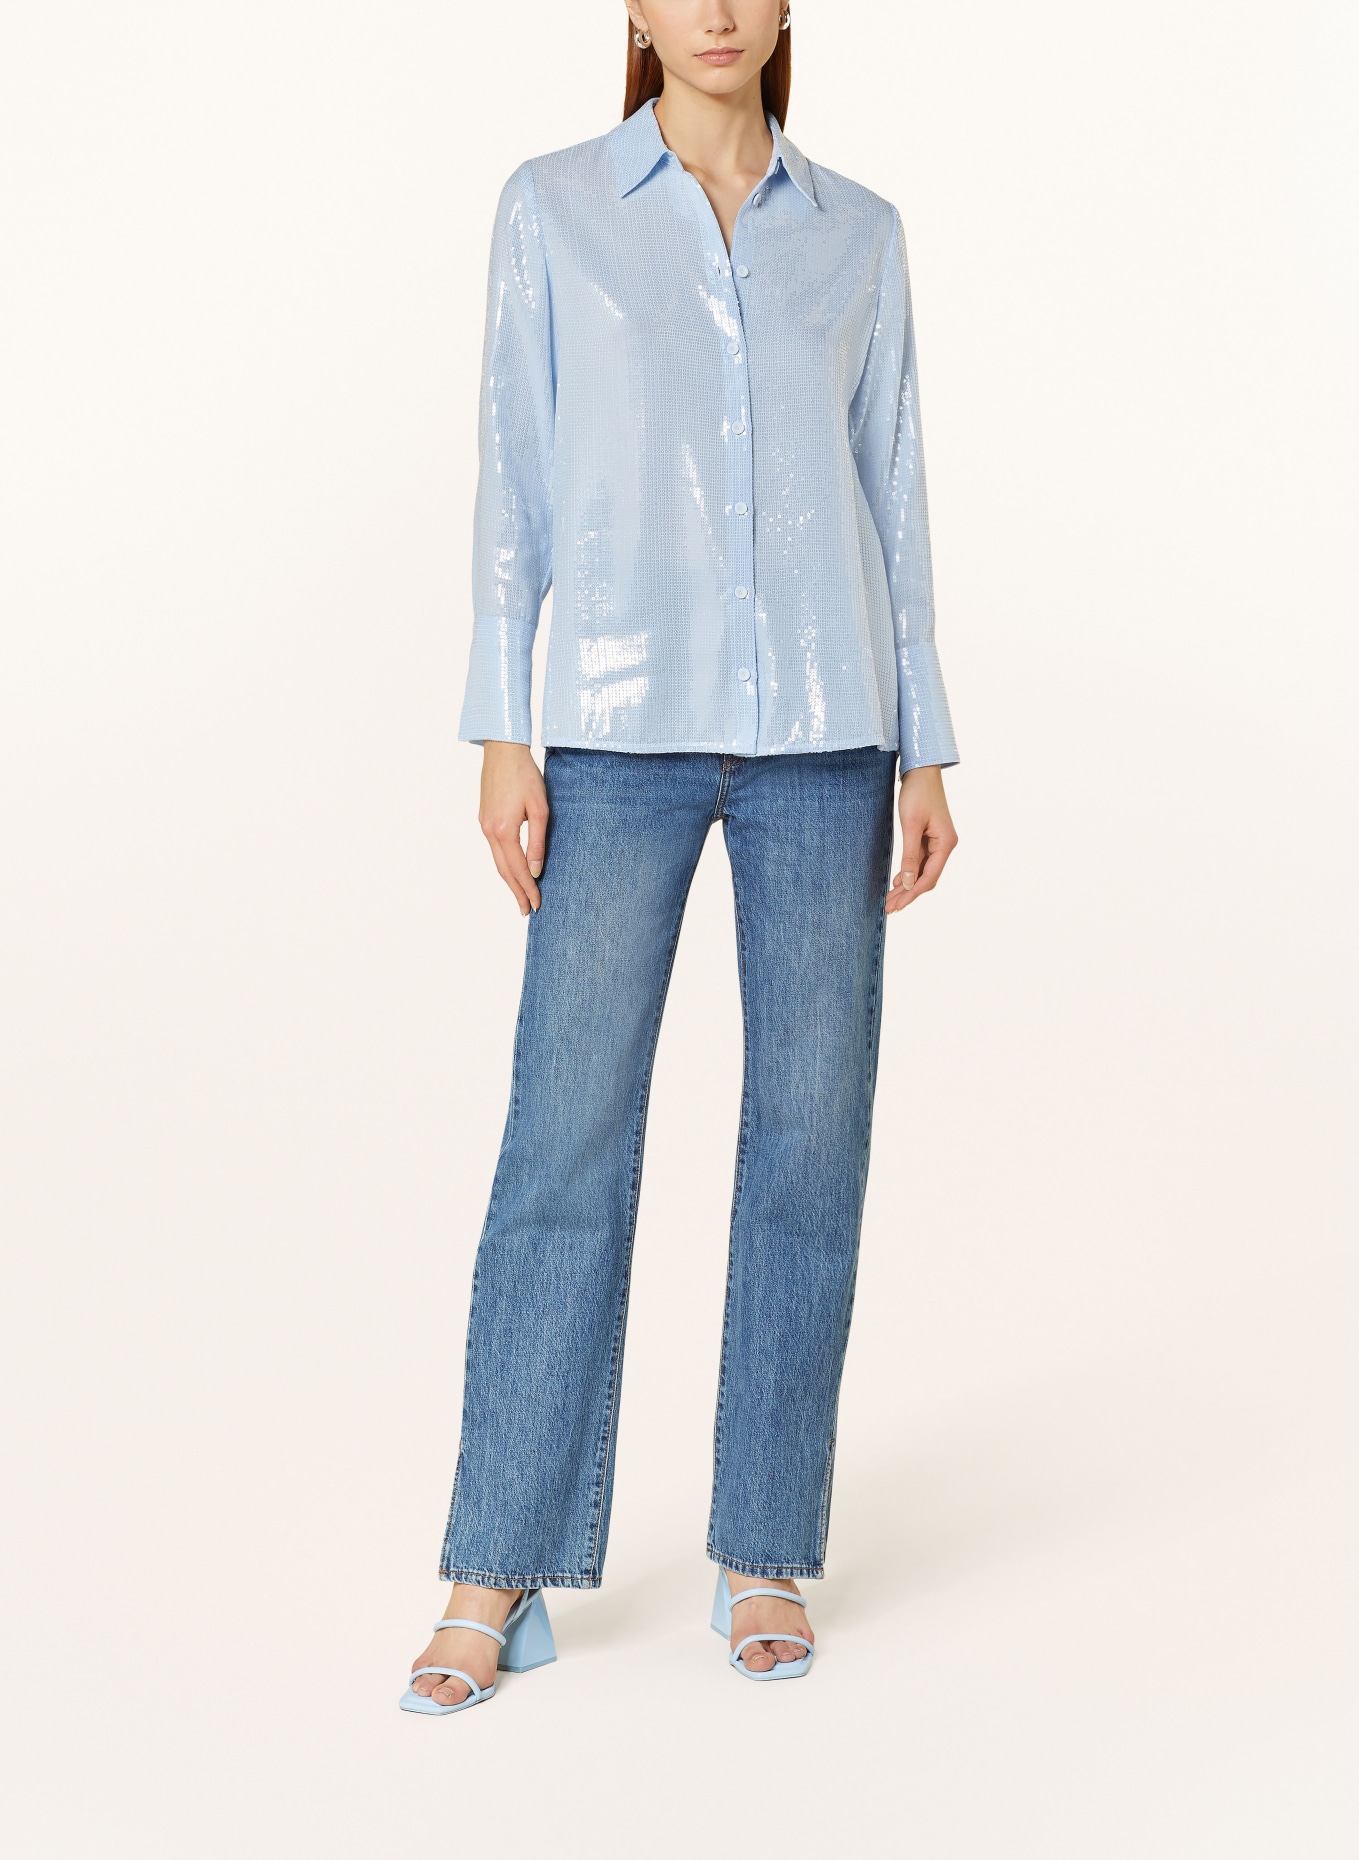 RIANI Shirt blouse with sequins, Color: LIGHT BLUE (Image 2)